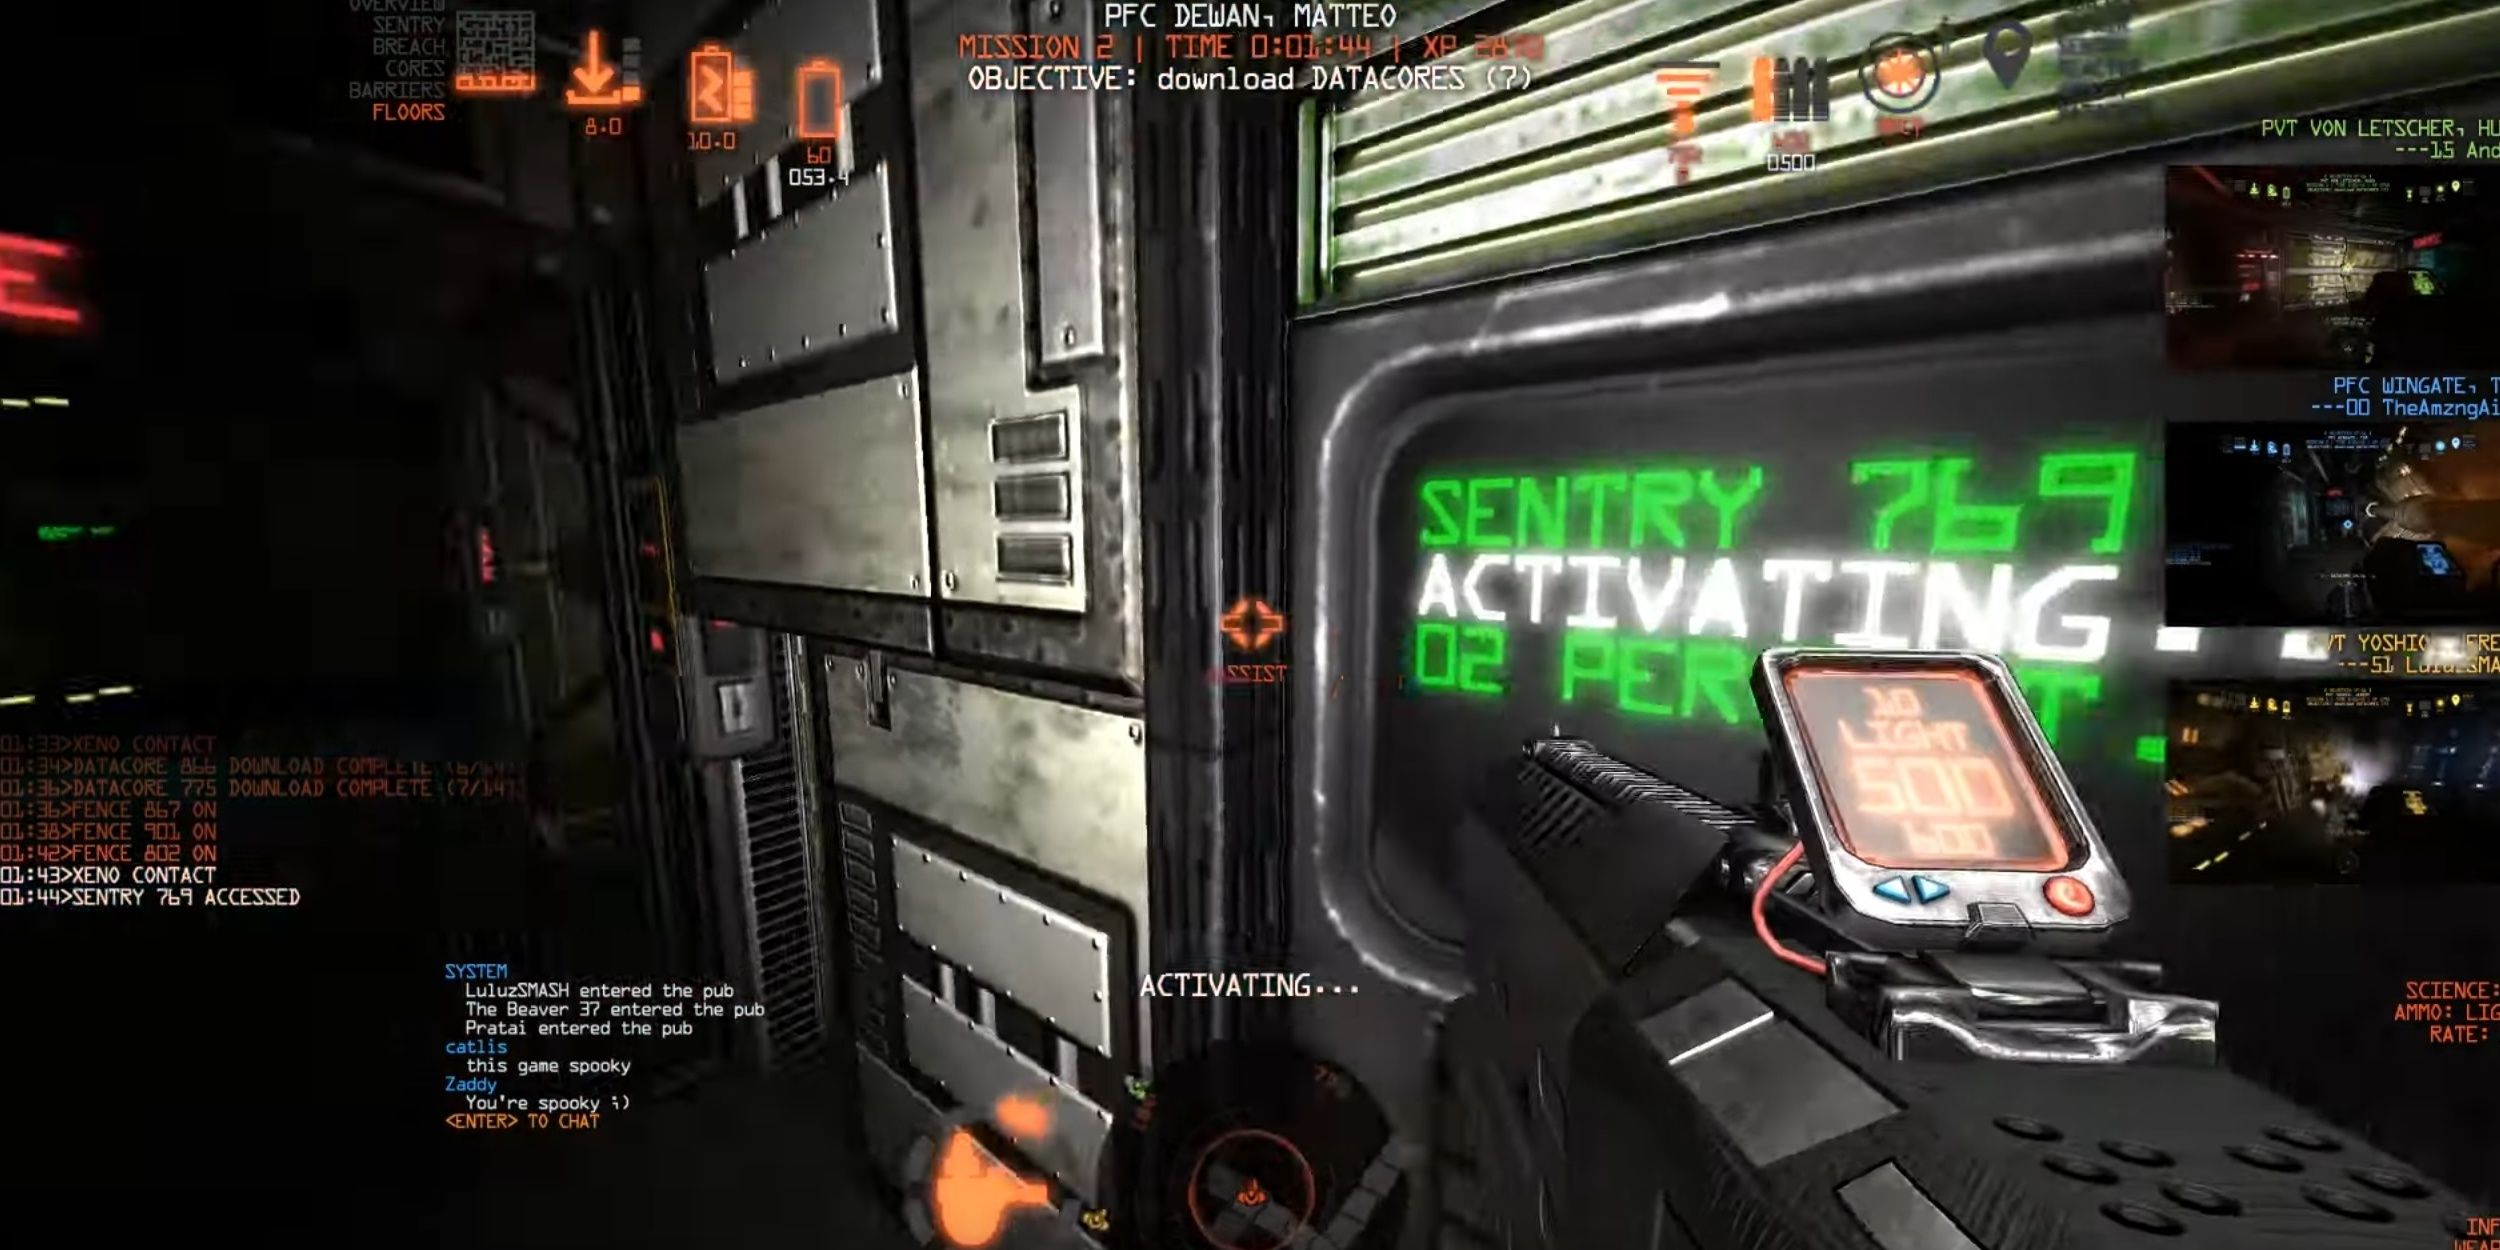 Activating a sentry gun. Once it reaches 100 percent, it will automatically fire upon approaching Space Beasts